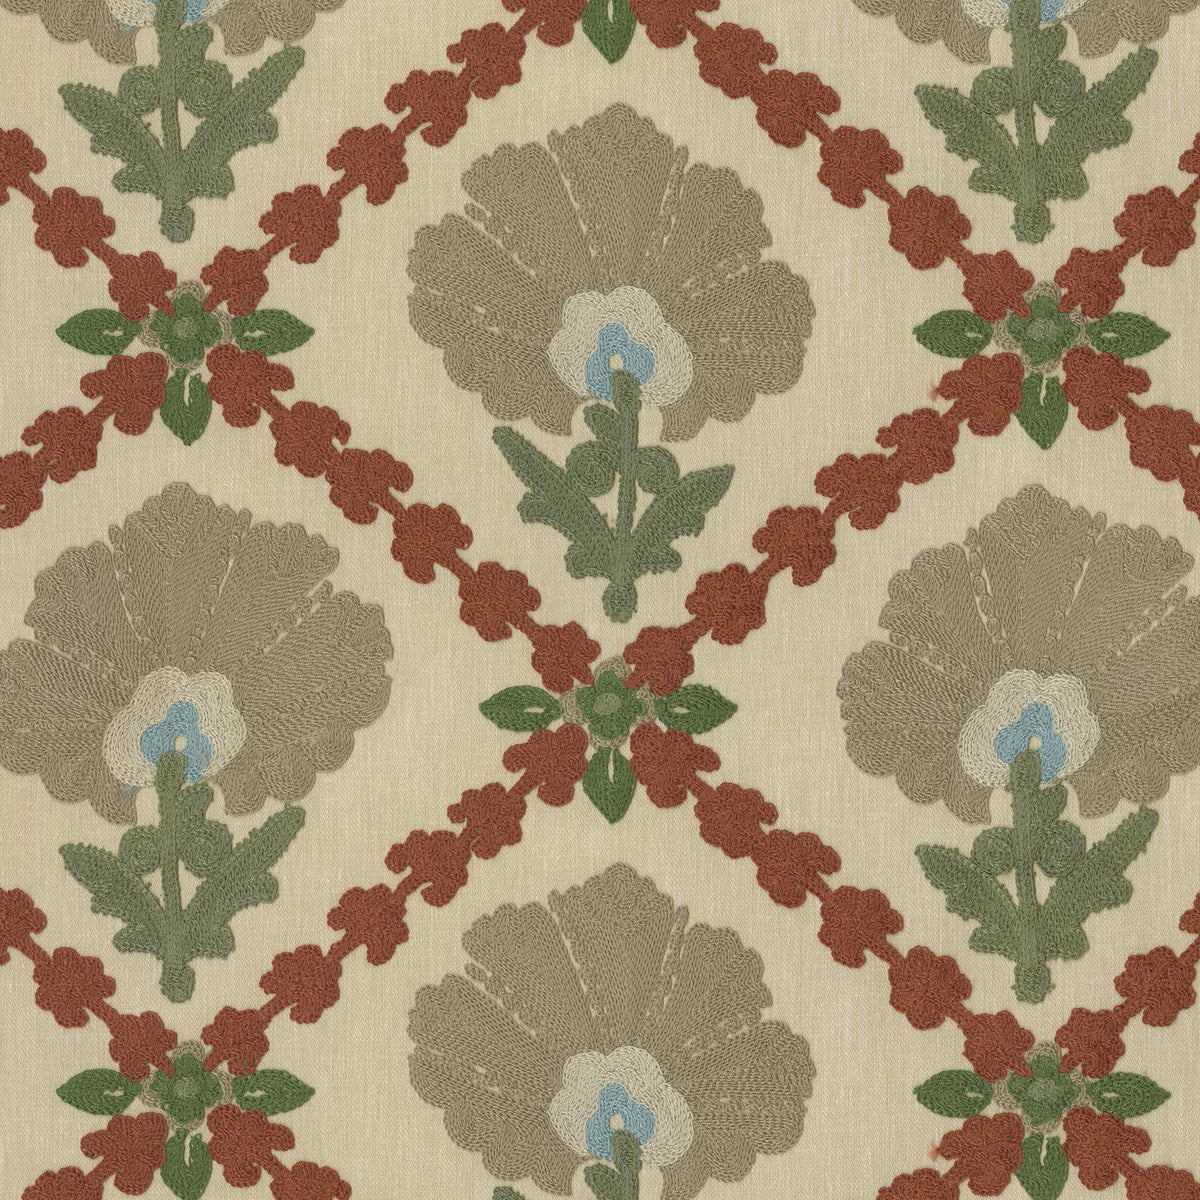 P/K Lifestyles Grand Fleur Embroidery - Harvest 411401 Upholstery Fabric